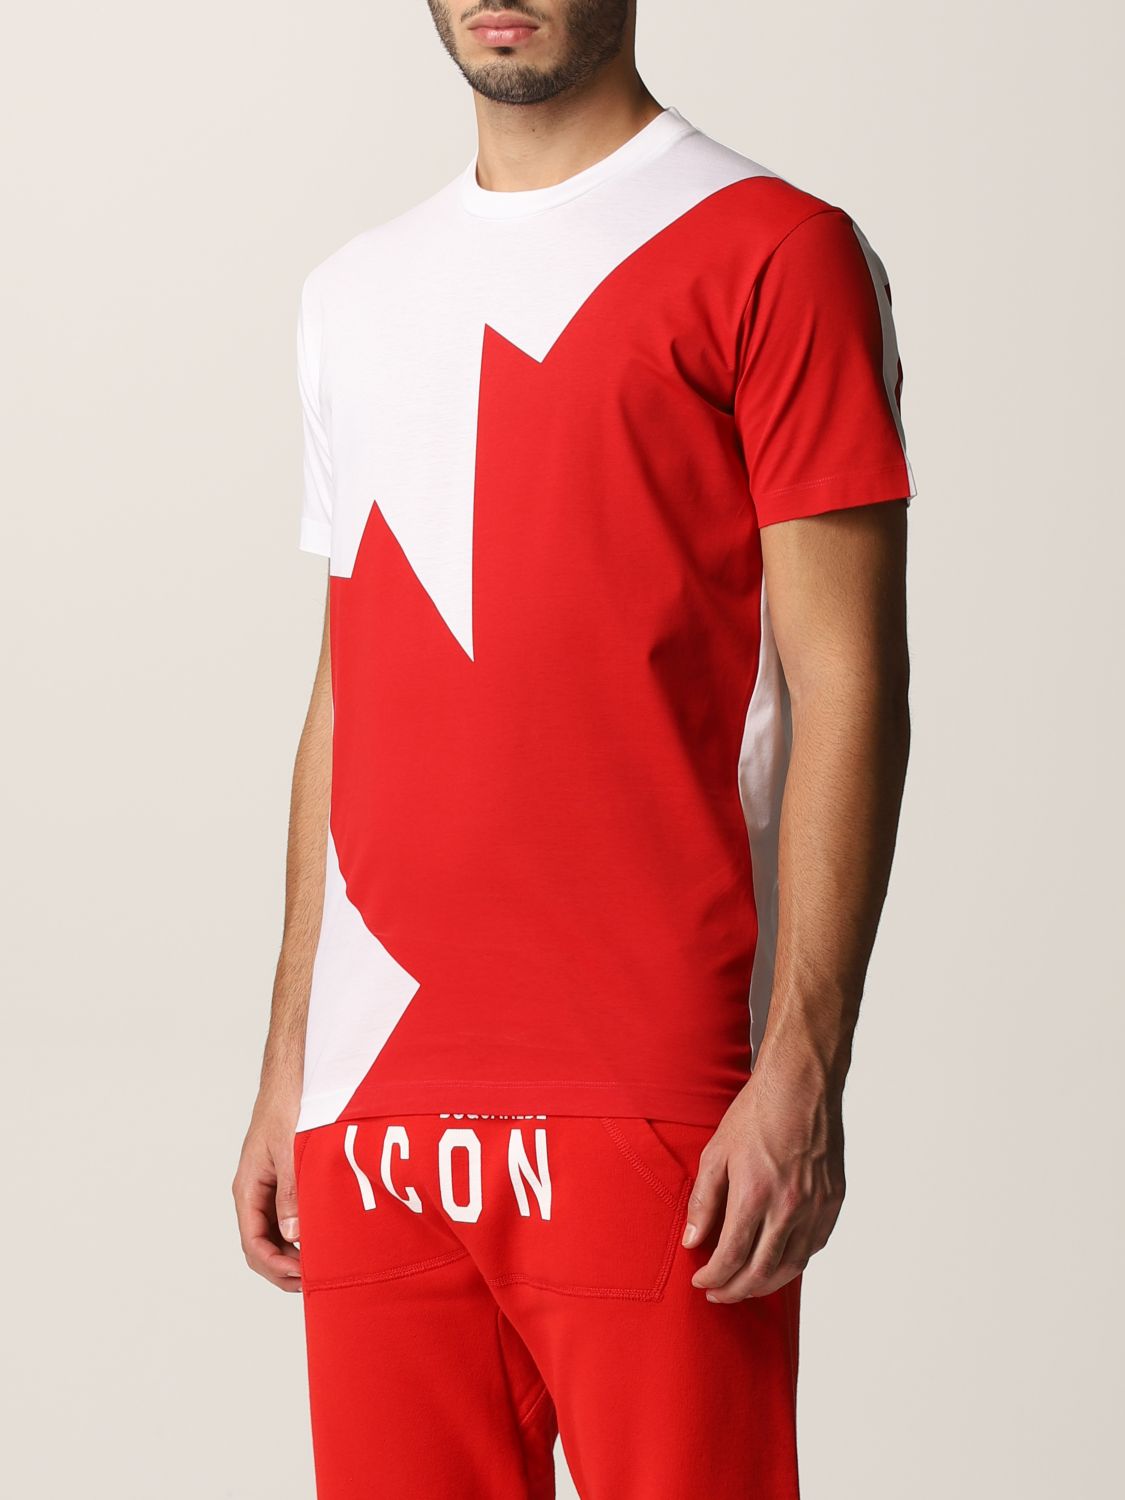 Expression Tees Canada Maple Leaf Womens Cropped T-Shirt 